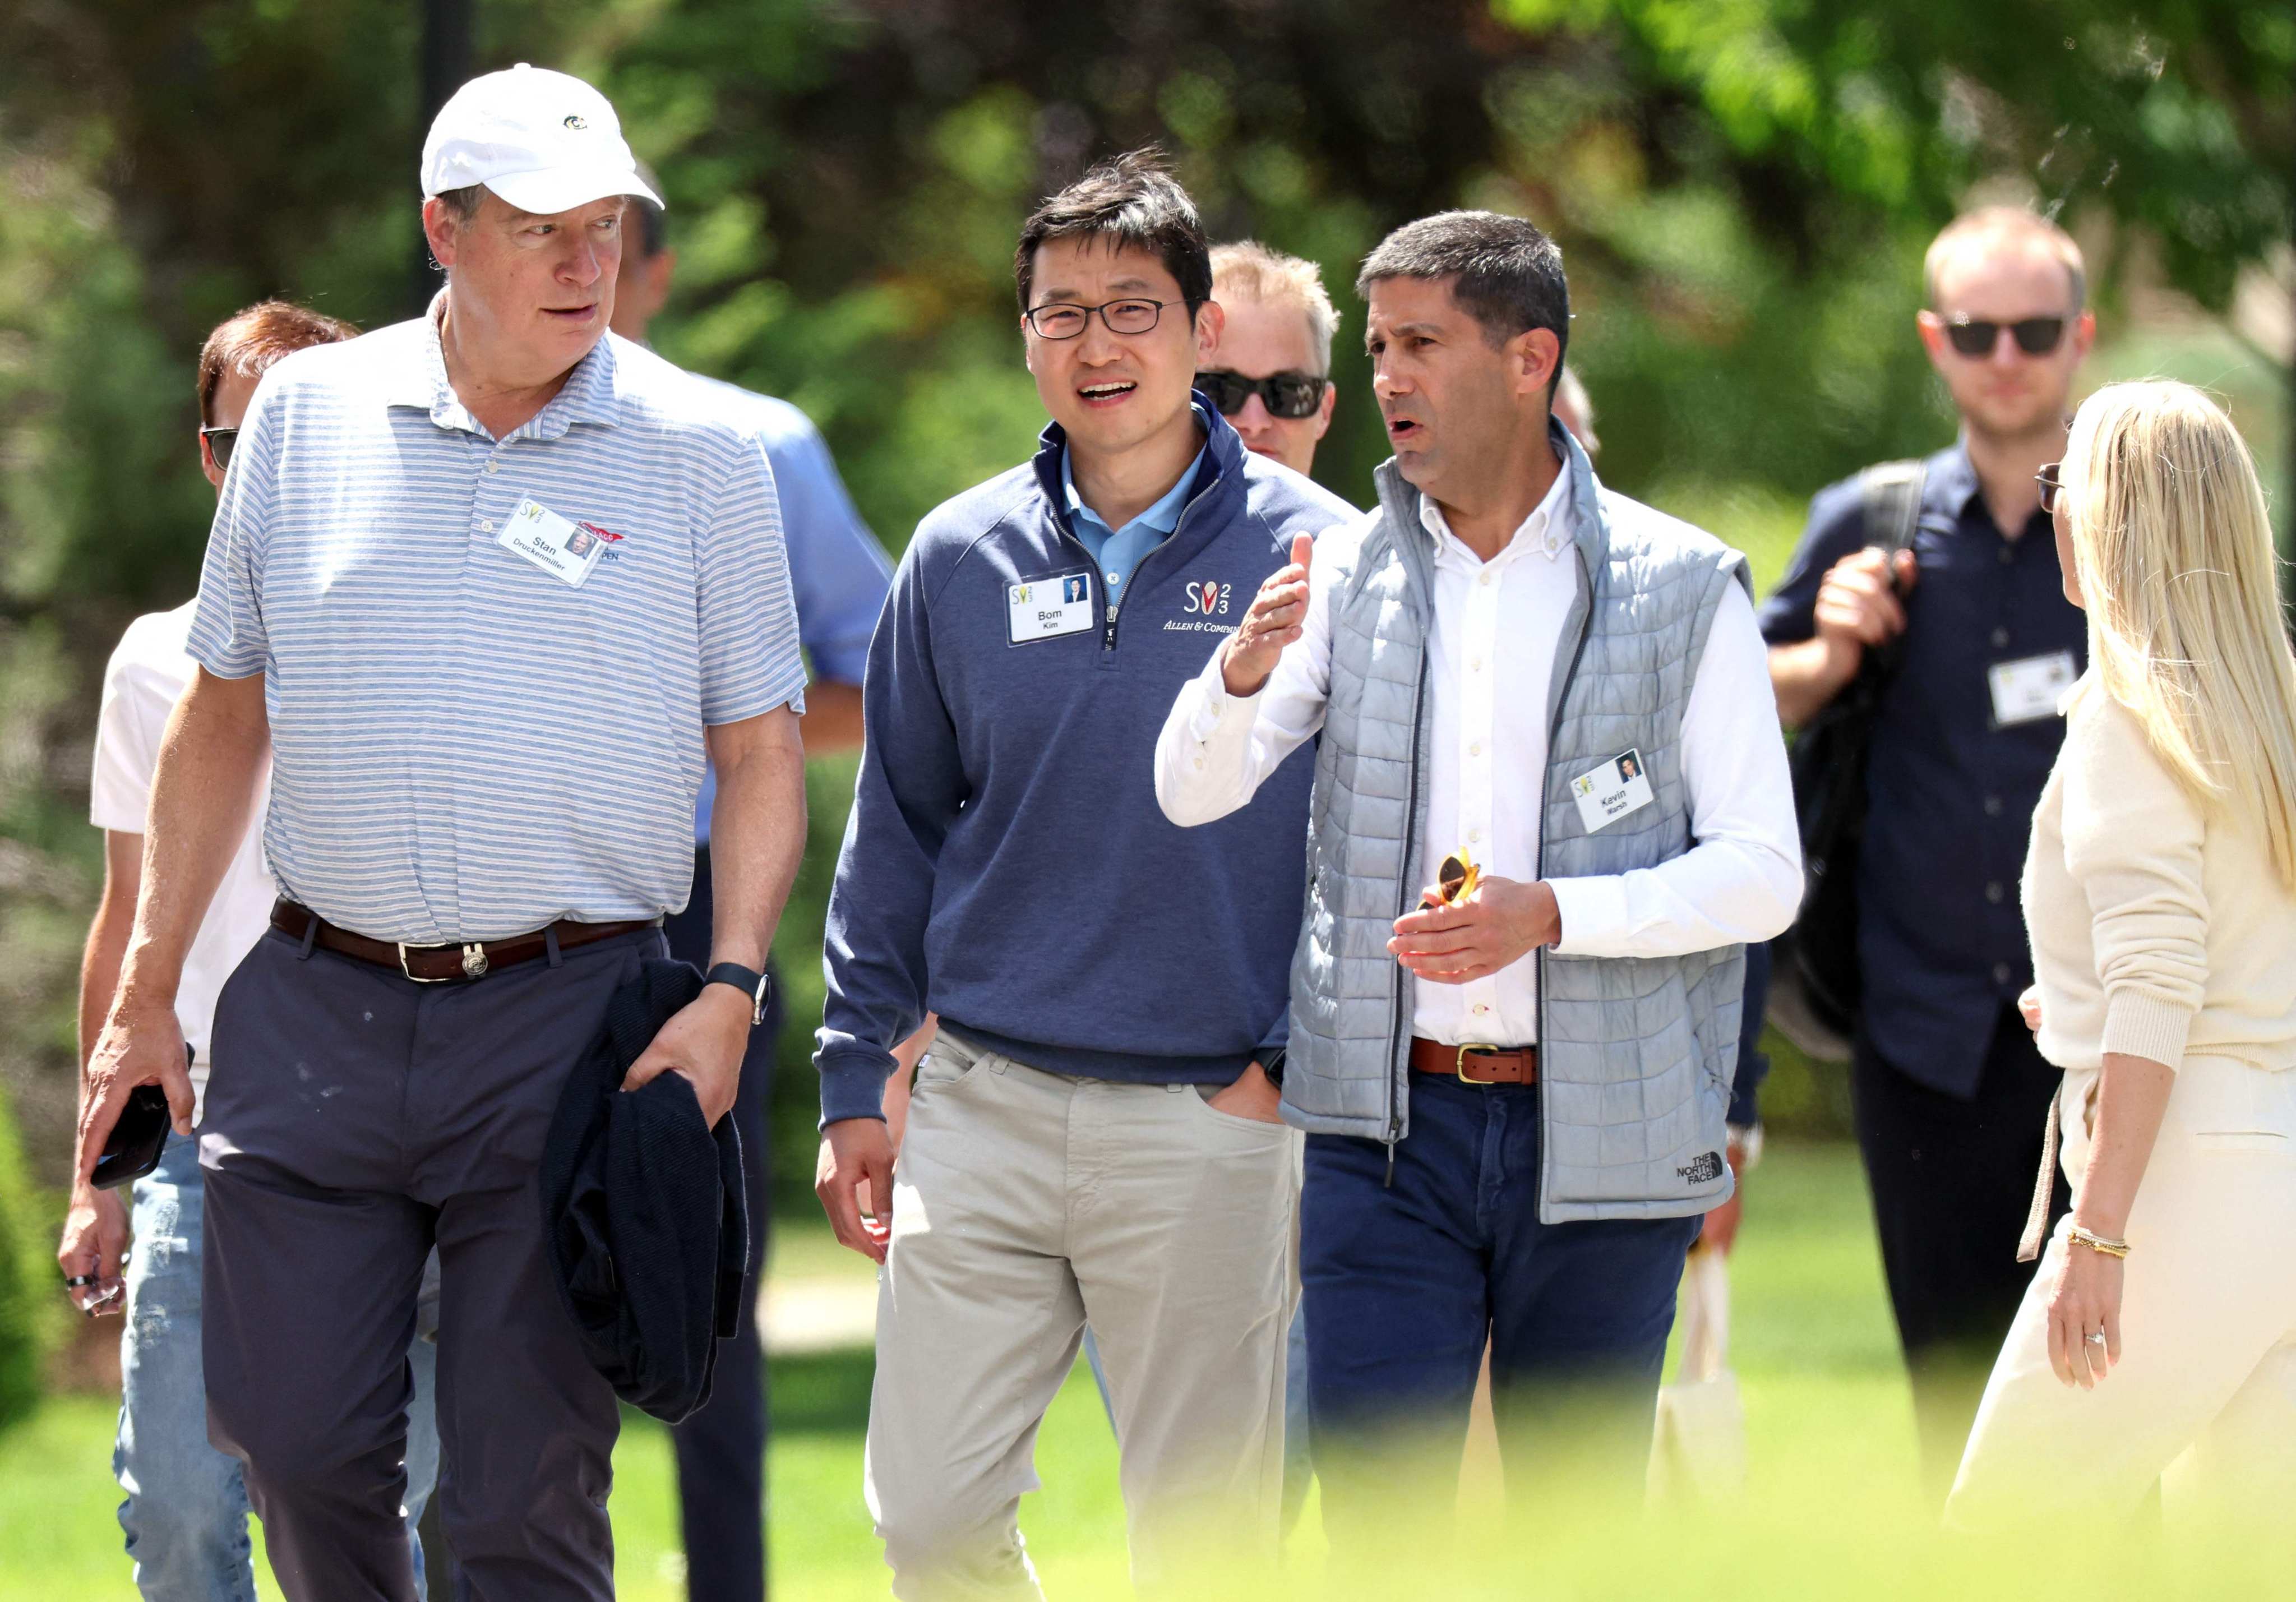 Bom Kim (centre), founder and CEO of Coupang, walks with investor Stan Druckenmiller and member of the Federal Reserve Board of Governors Kevin Warsh at the Allen & Company Sun Valley Conference on July 13, in Sun Valley, Idaho. Photo: AFP